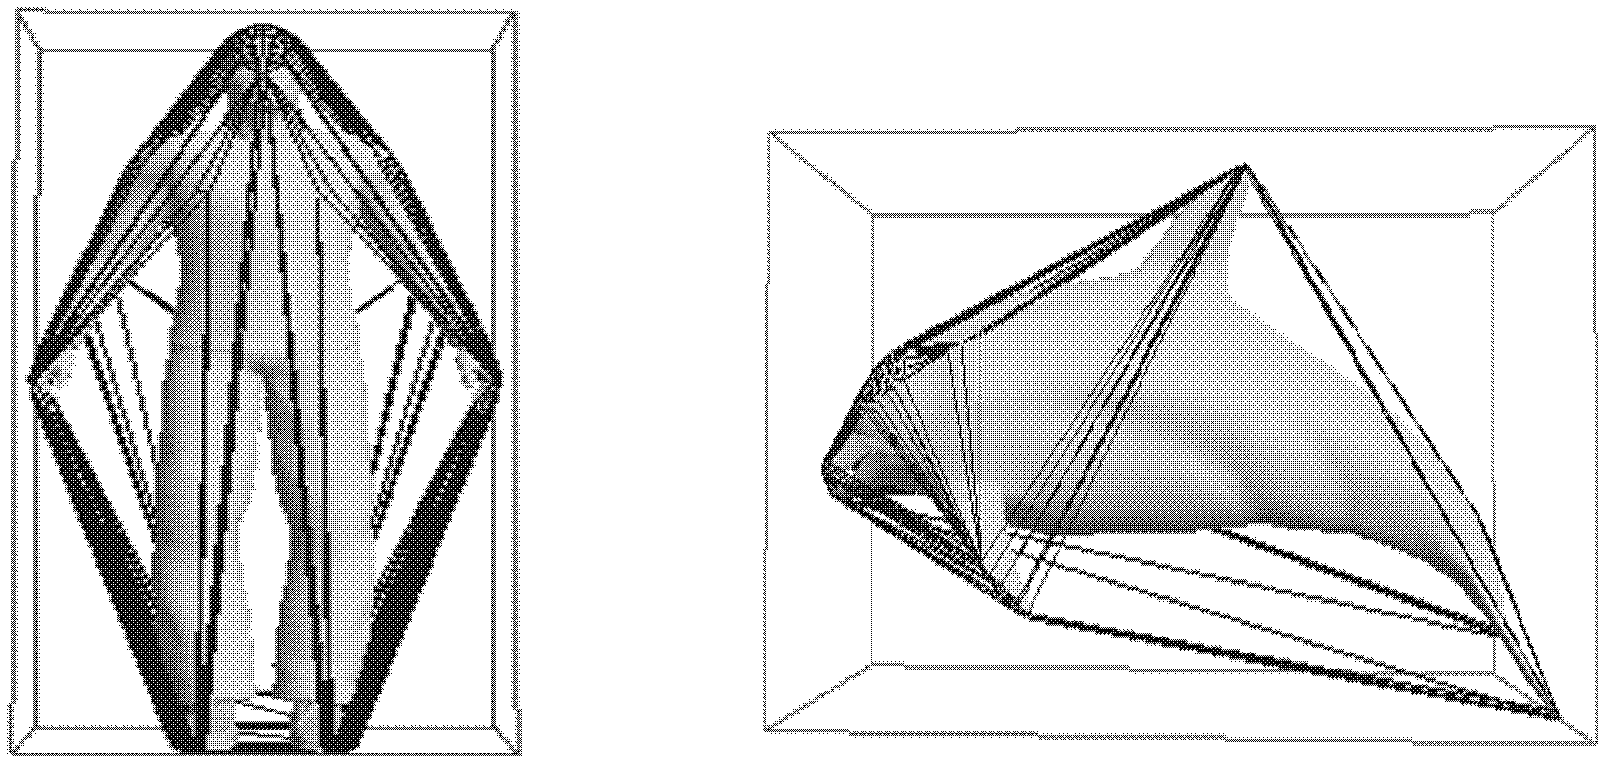 Convex hull and OBB (Oriented Bounding Box)-based three-dimensional grid model framework extracting method